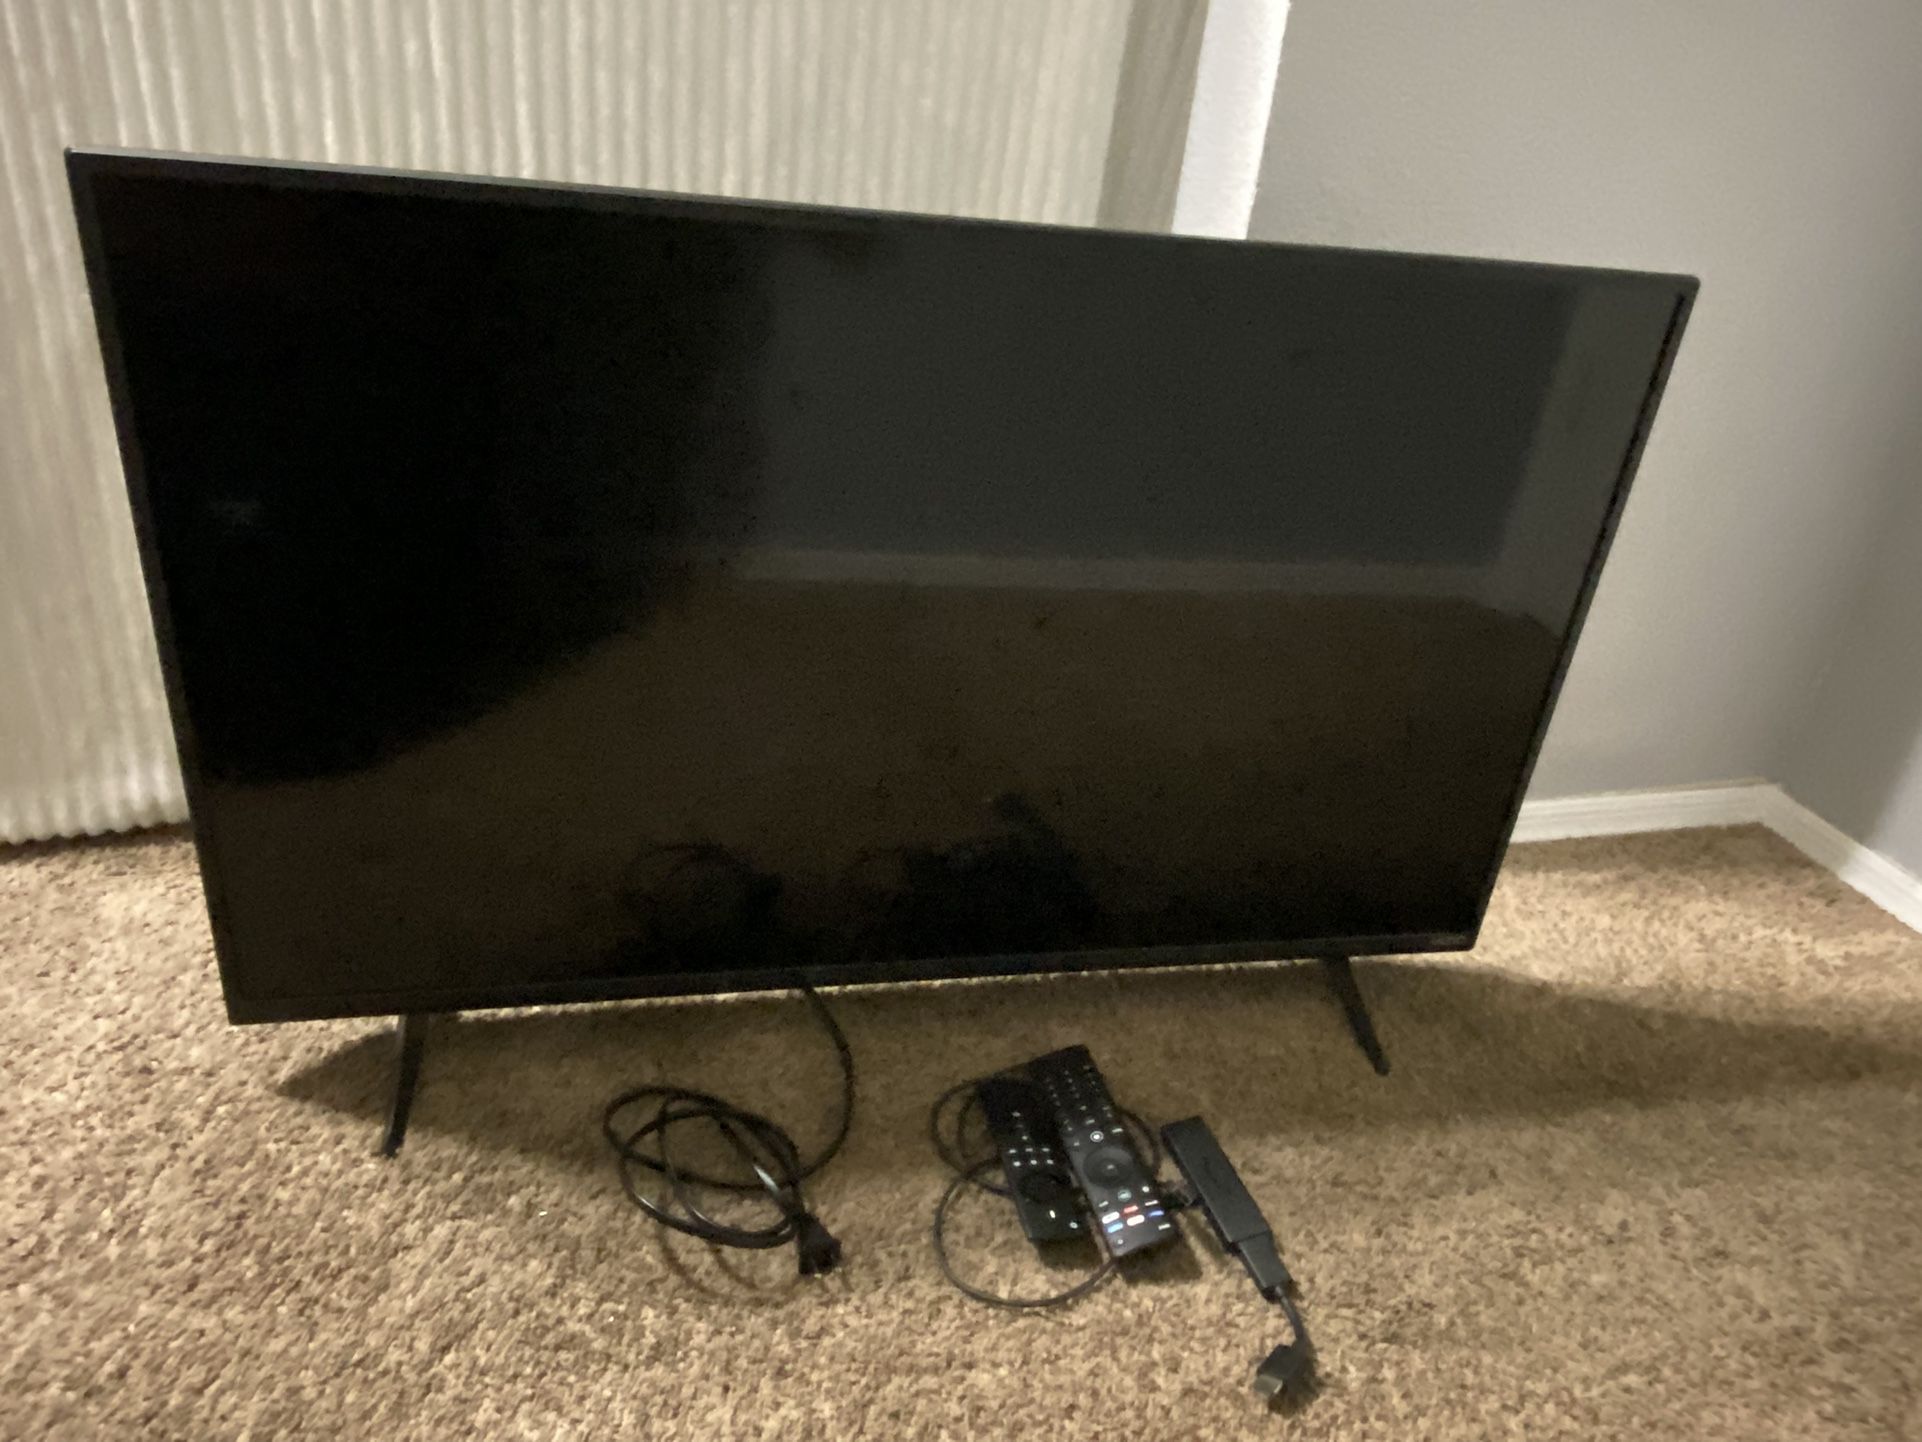 ‘43 Samsung Tv With Amazon Fire stick 